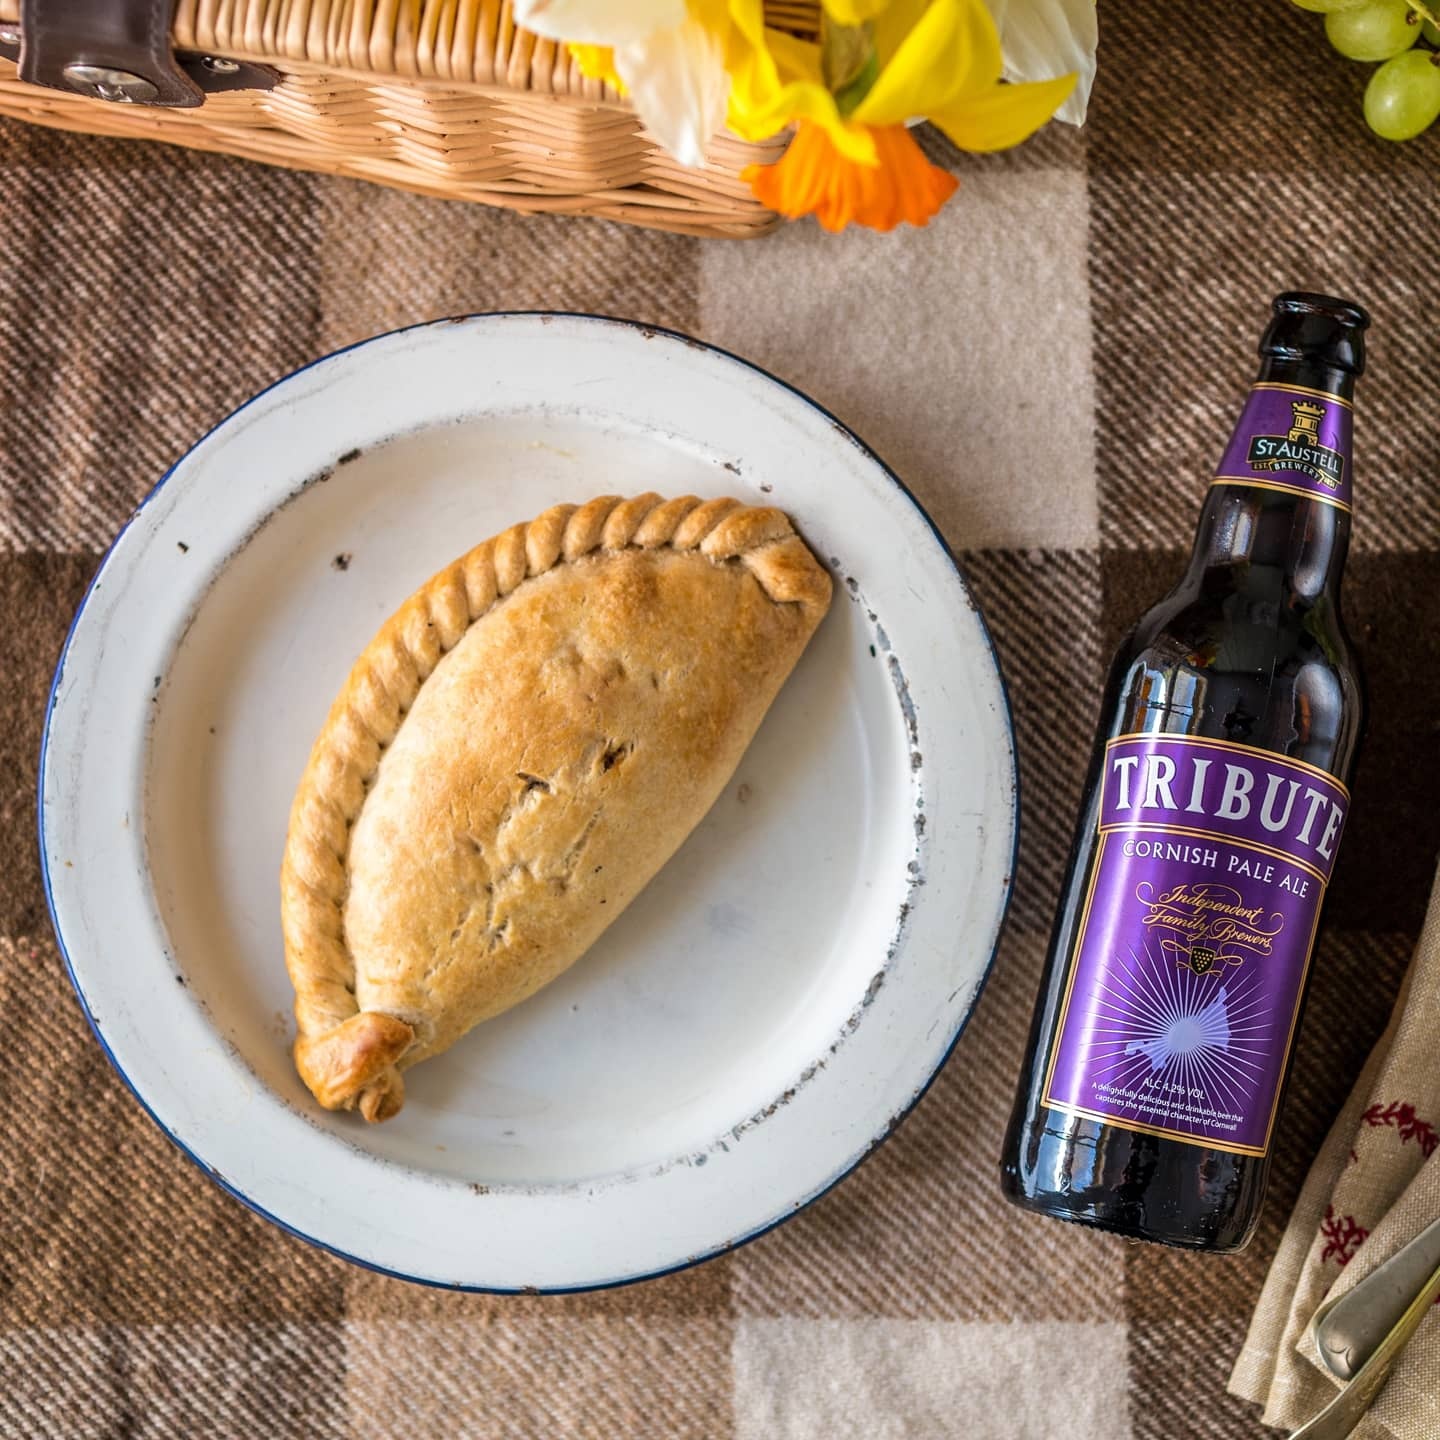 Image for £5 Off Our New Steak & Ale / Pork & Apple Pasties